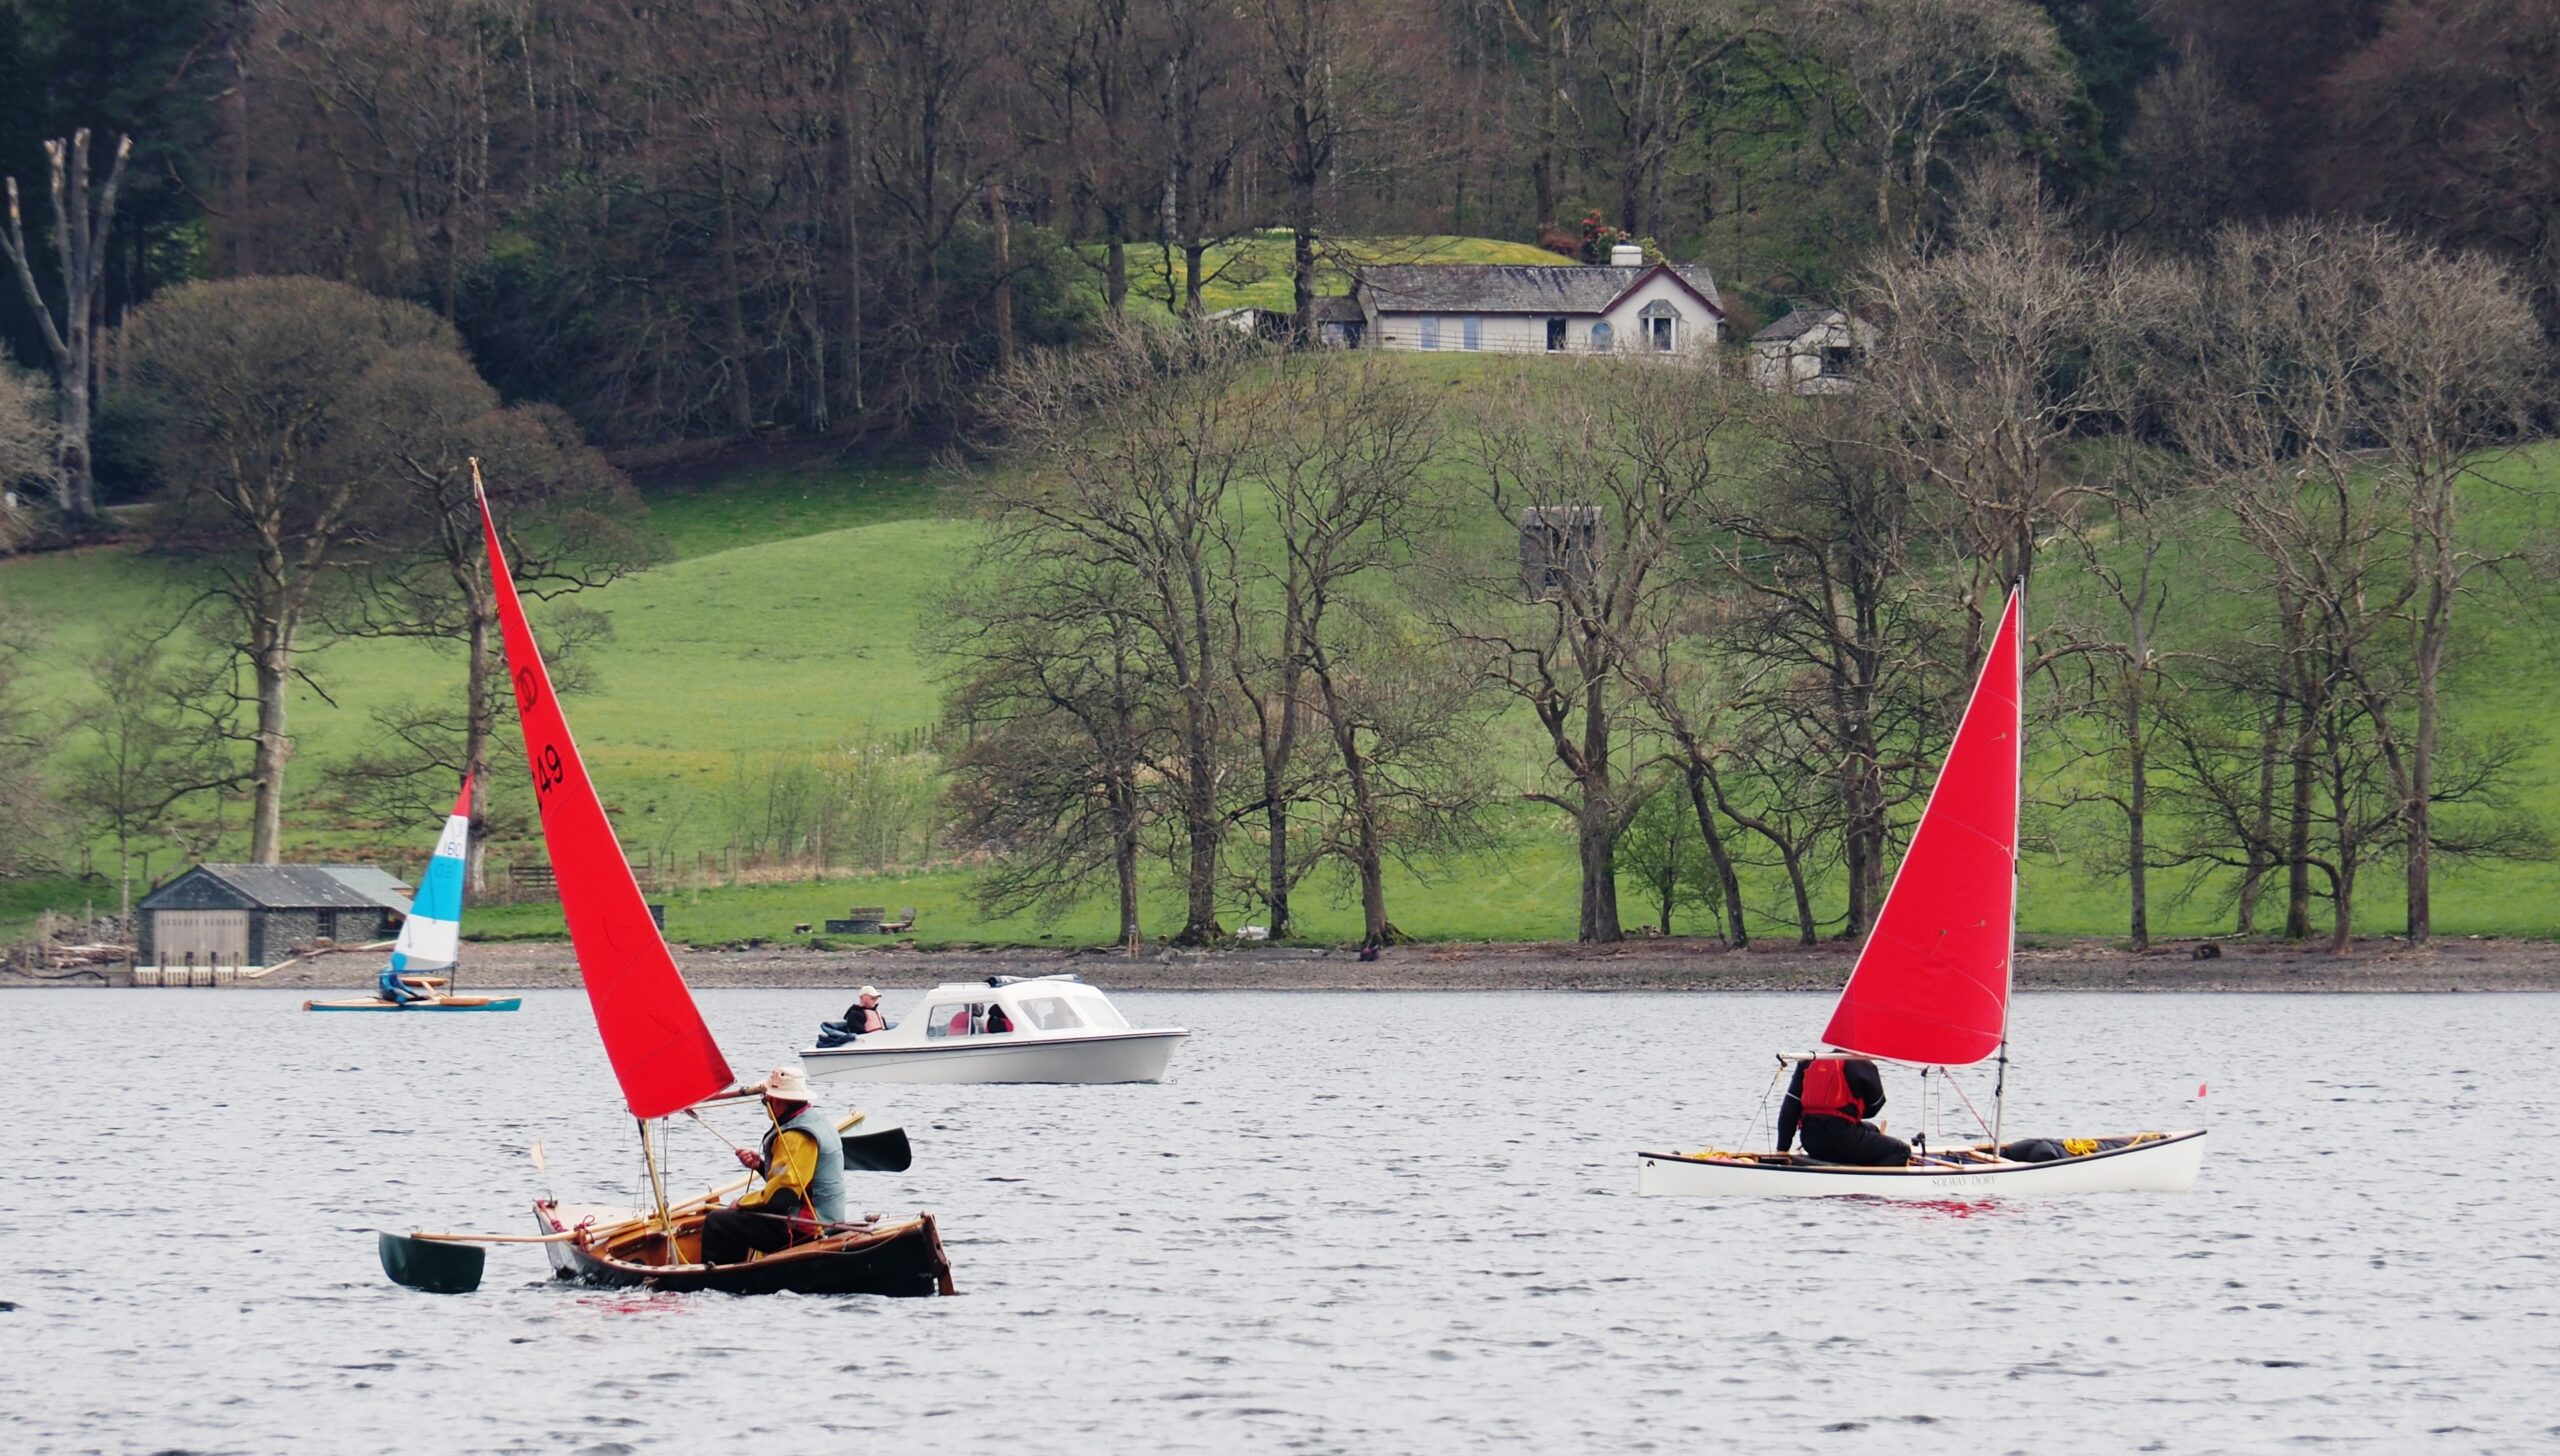 3 canoes racing under sail on Coniston Water, with a small hire launch pottering about as well